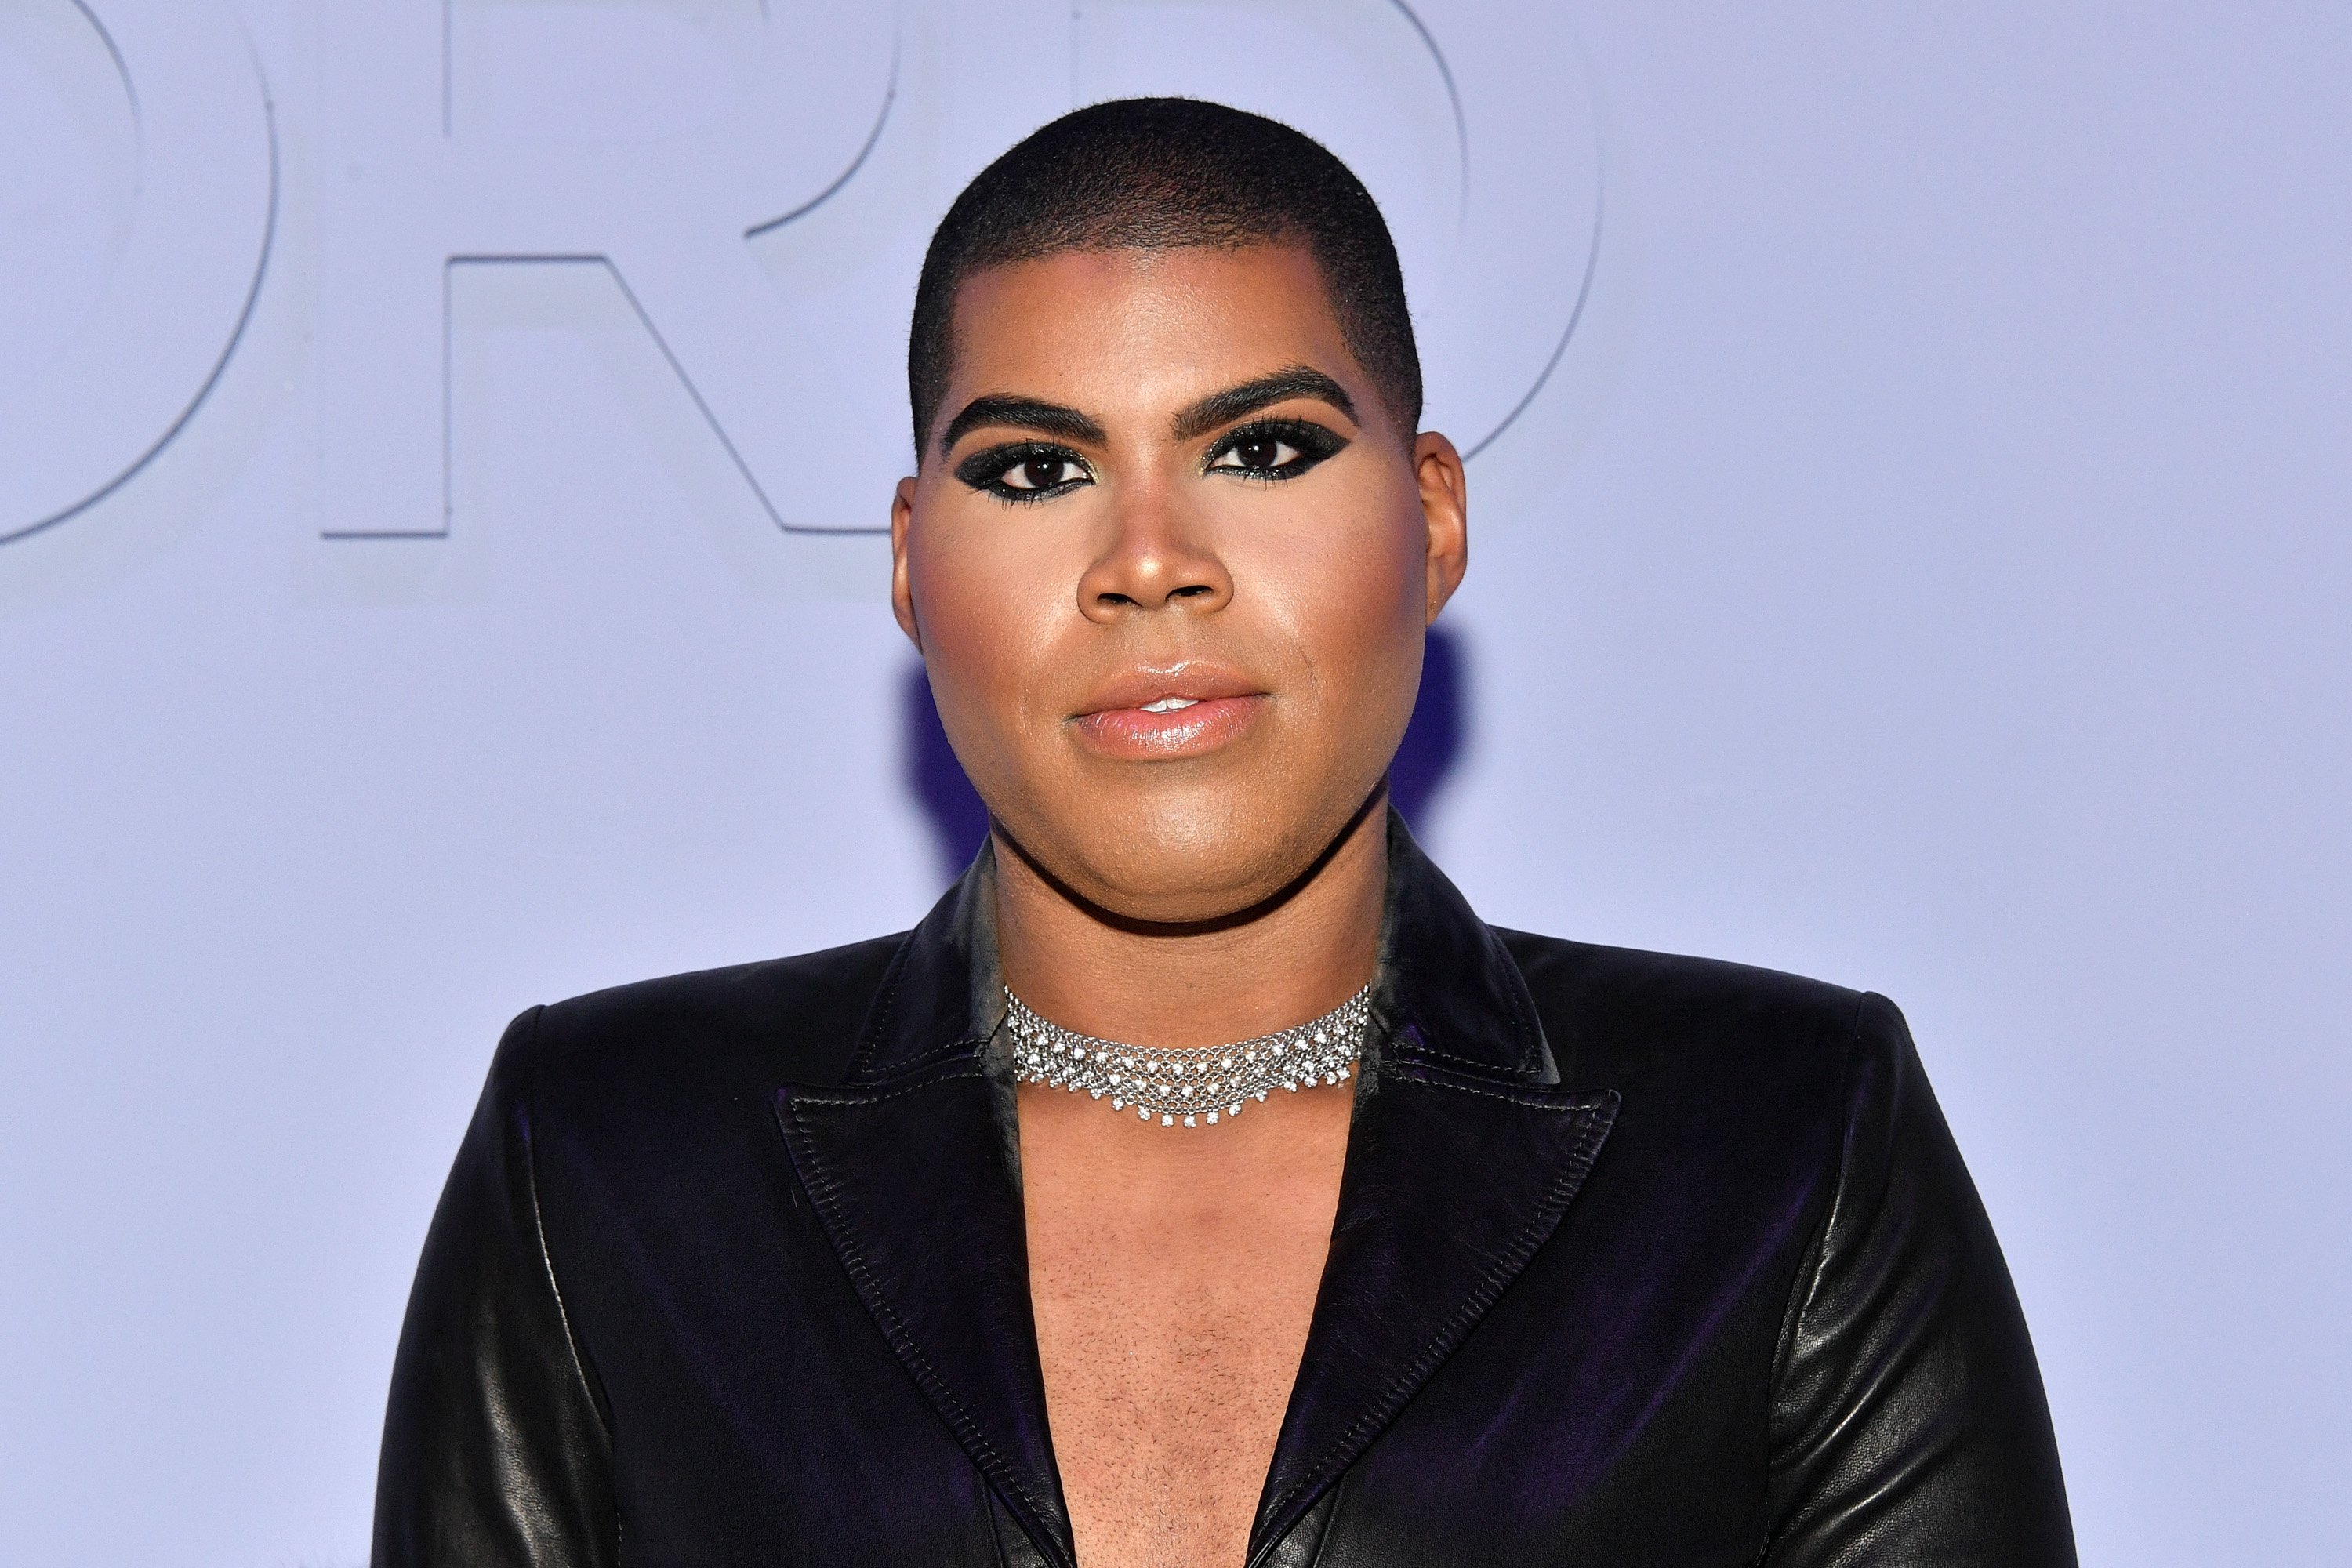 EJ Johnson at the Tom Ford Women's Fall/Winter 2018 fashion show during New York Fashion Week on February 8, 2018 | Photo: Getty Images